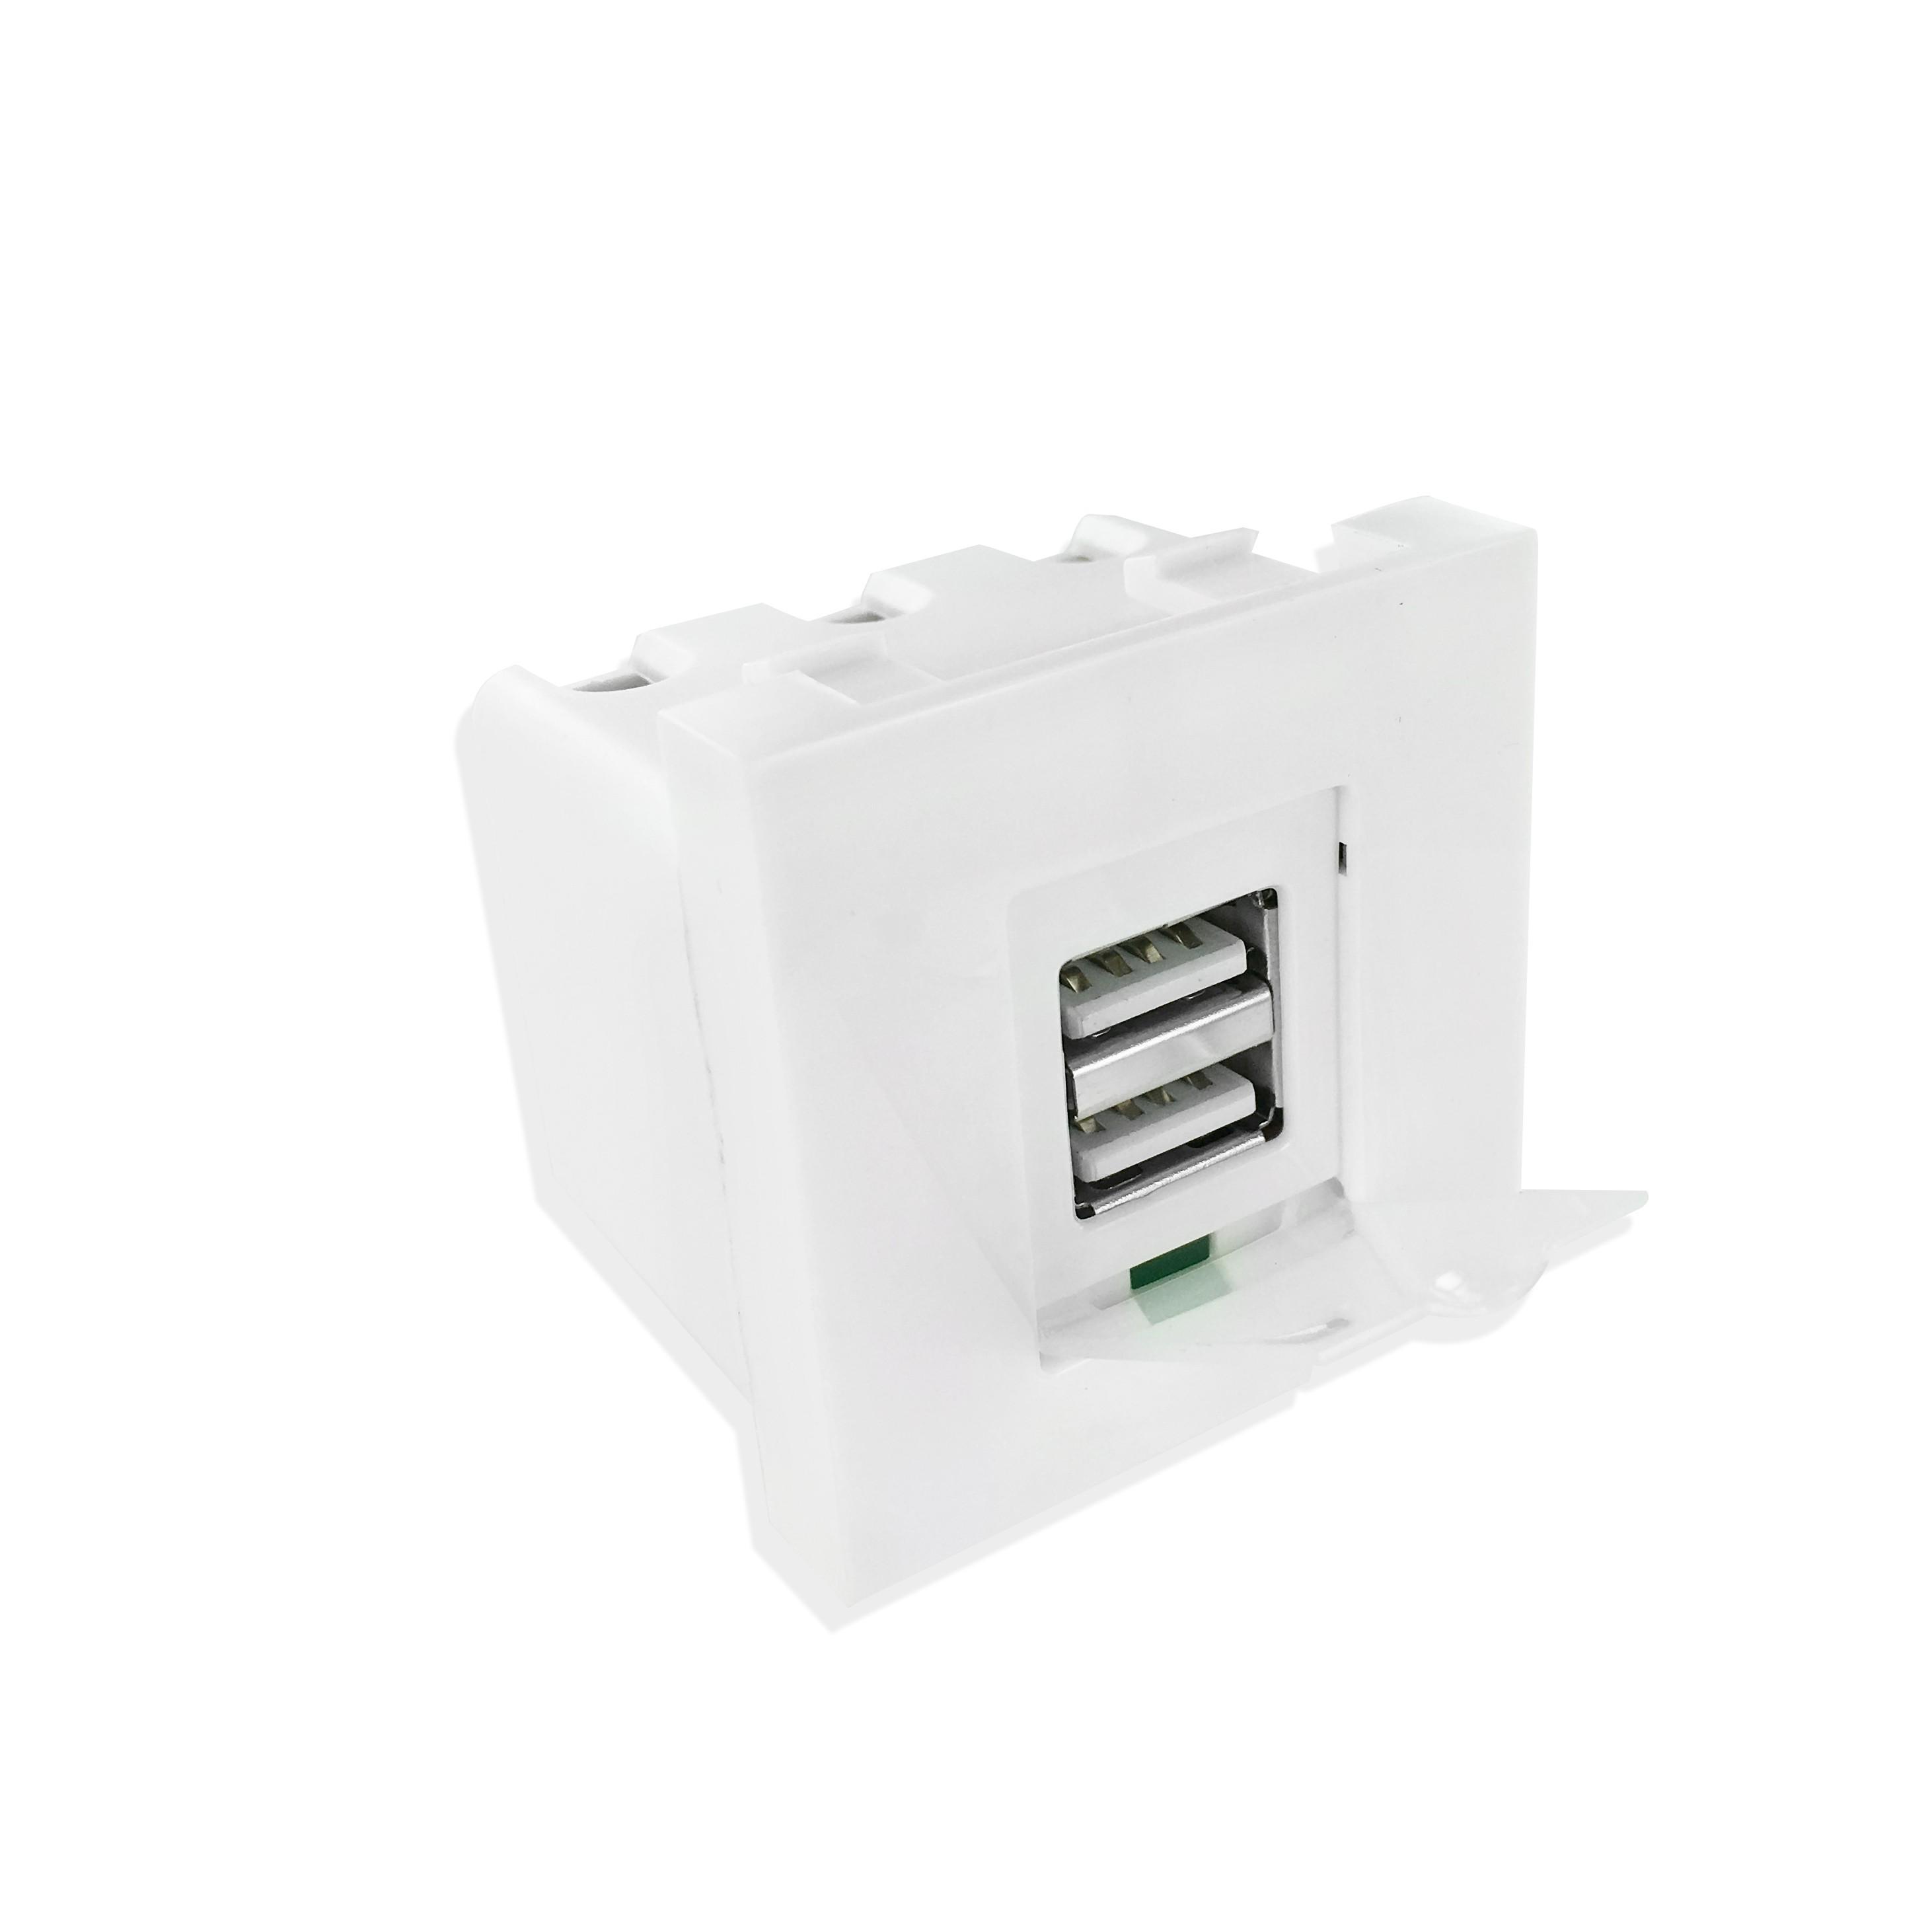 Plastron 45x45 Chargeur USB 2 sorties type A F-230V vers 5V 2.1A EOL